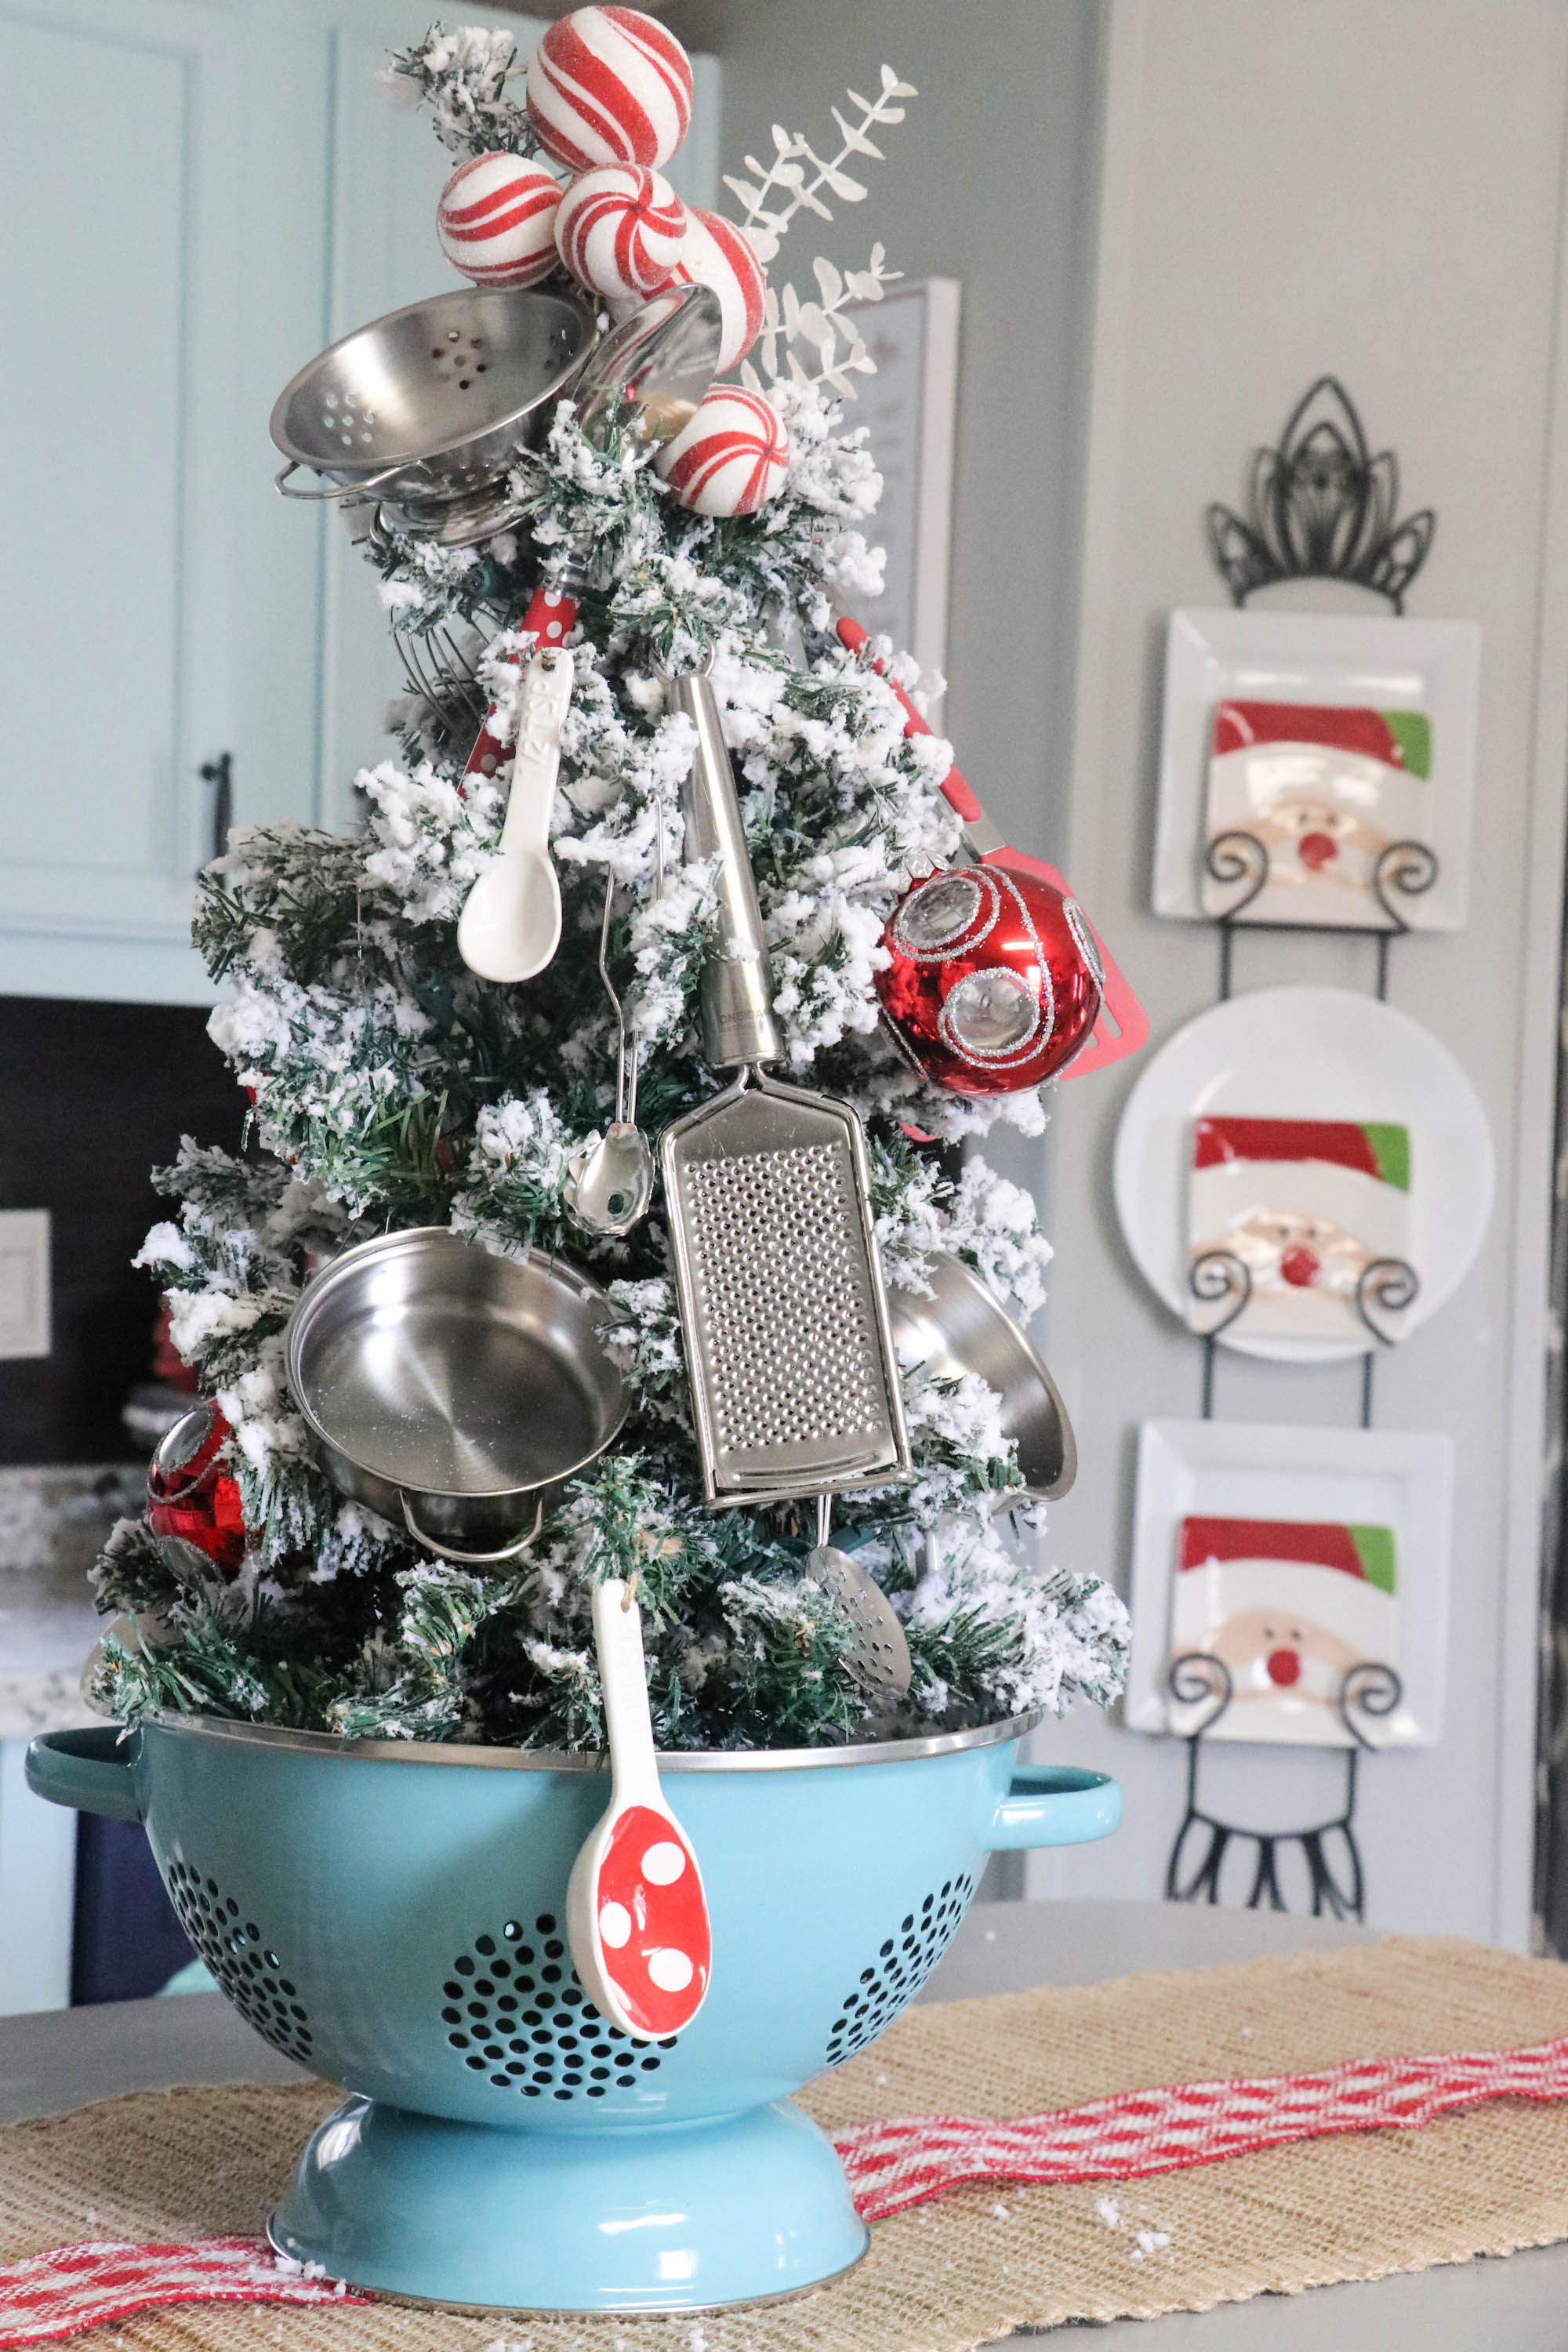 https://www.re-fabbed.com/wp-content/uploads/2017/11/kitchen_christmas_tree7.jpg